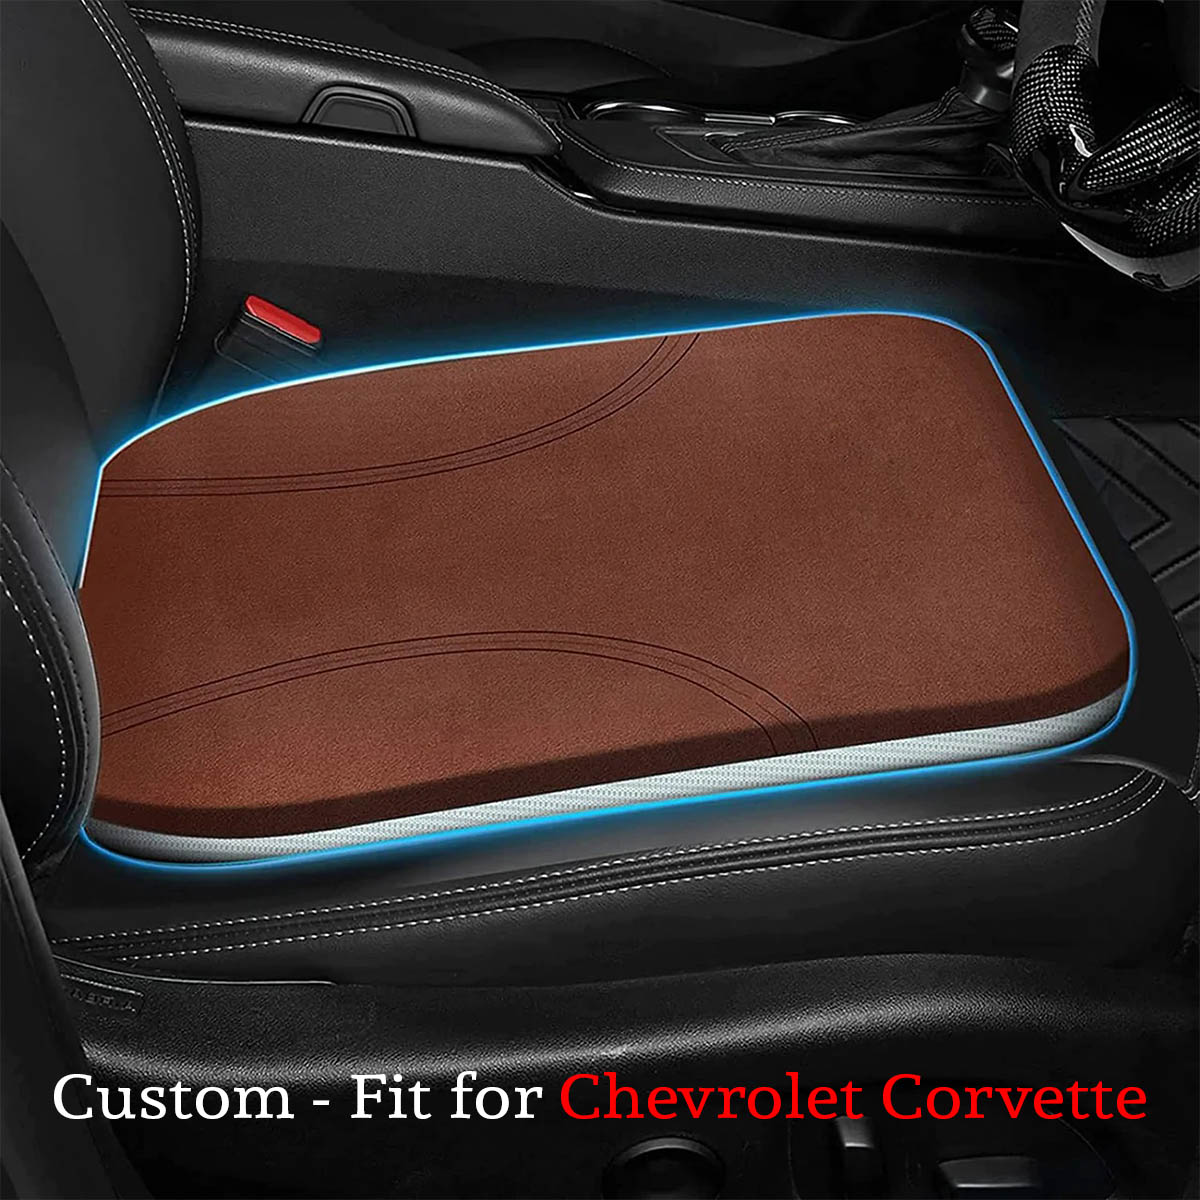 Delicate Leather Car Seat Cushion, Custom For Cars, Car Memory Foam Seat Cushion, Heightening Seat Cushion, Seat Cushion for Car and Office Chair CC19999